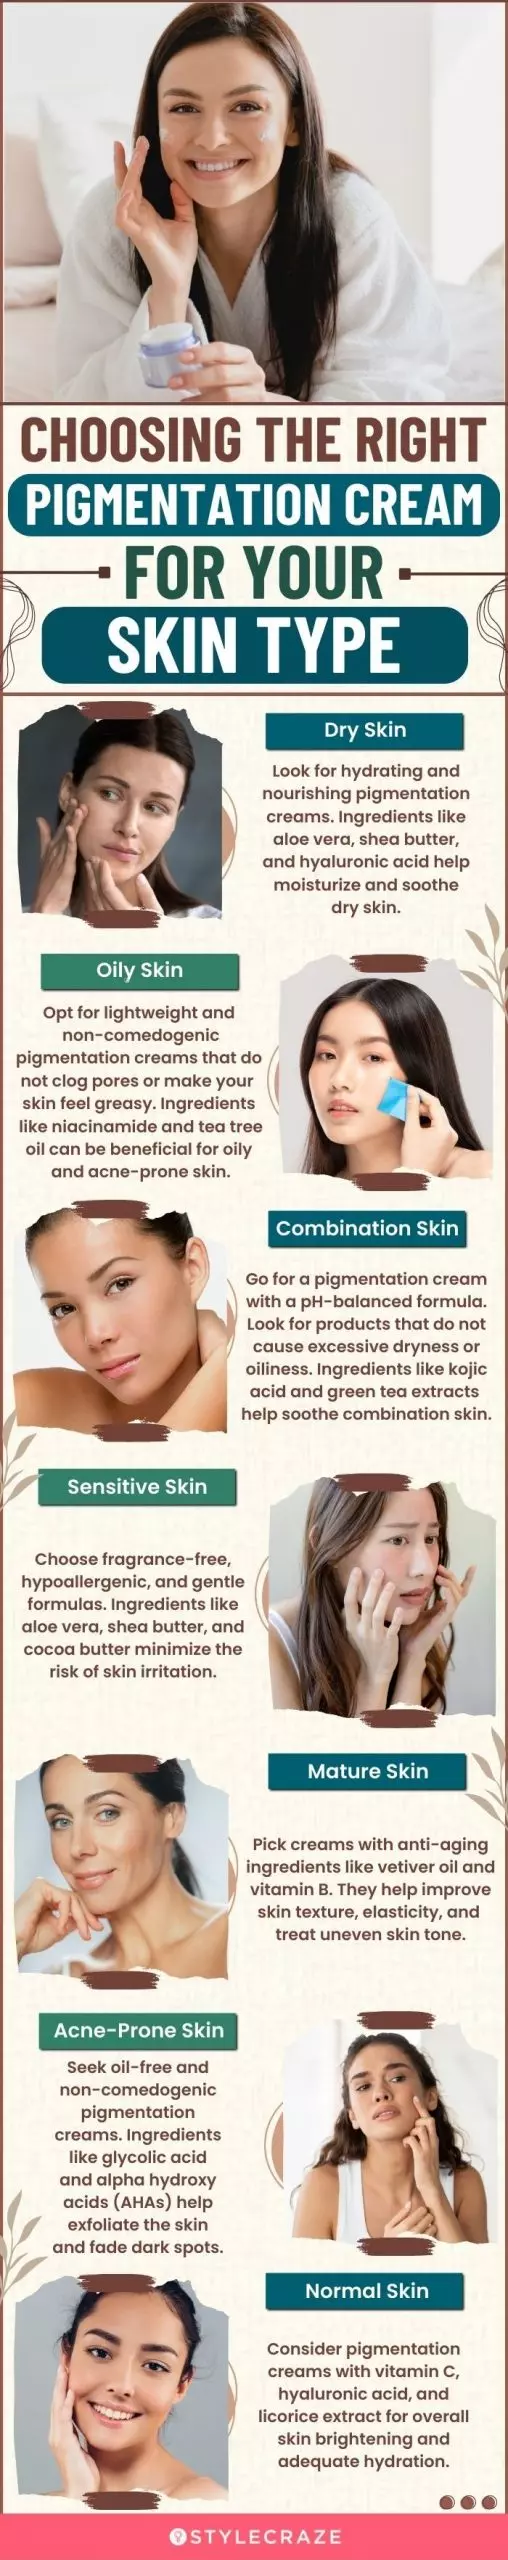 Choosing The Right Pigmentation Cream For Your Skin Type (infographic)